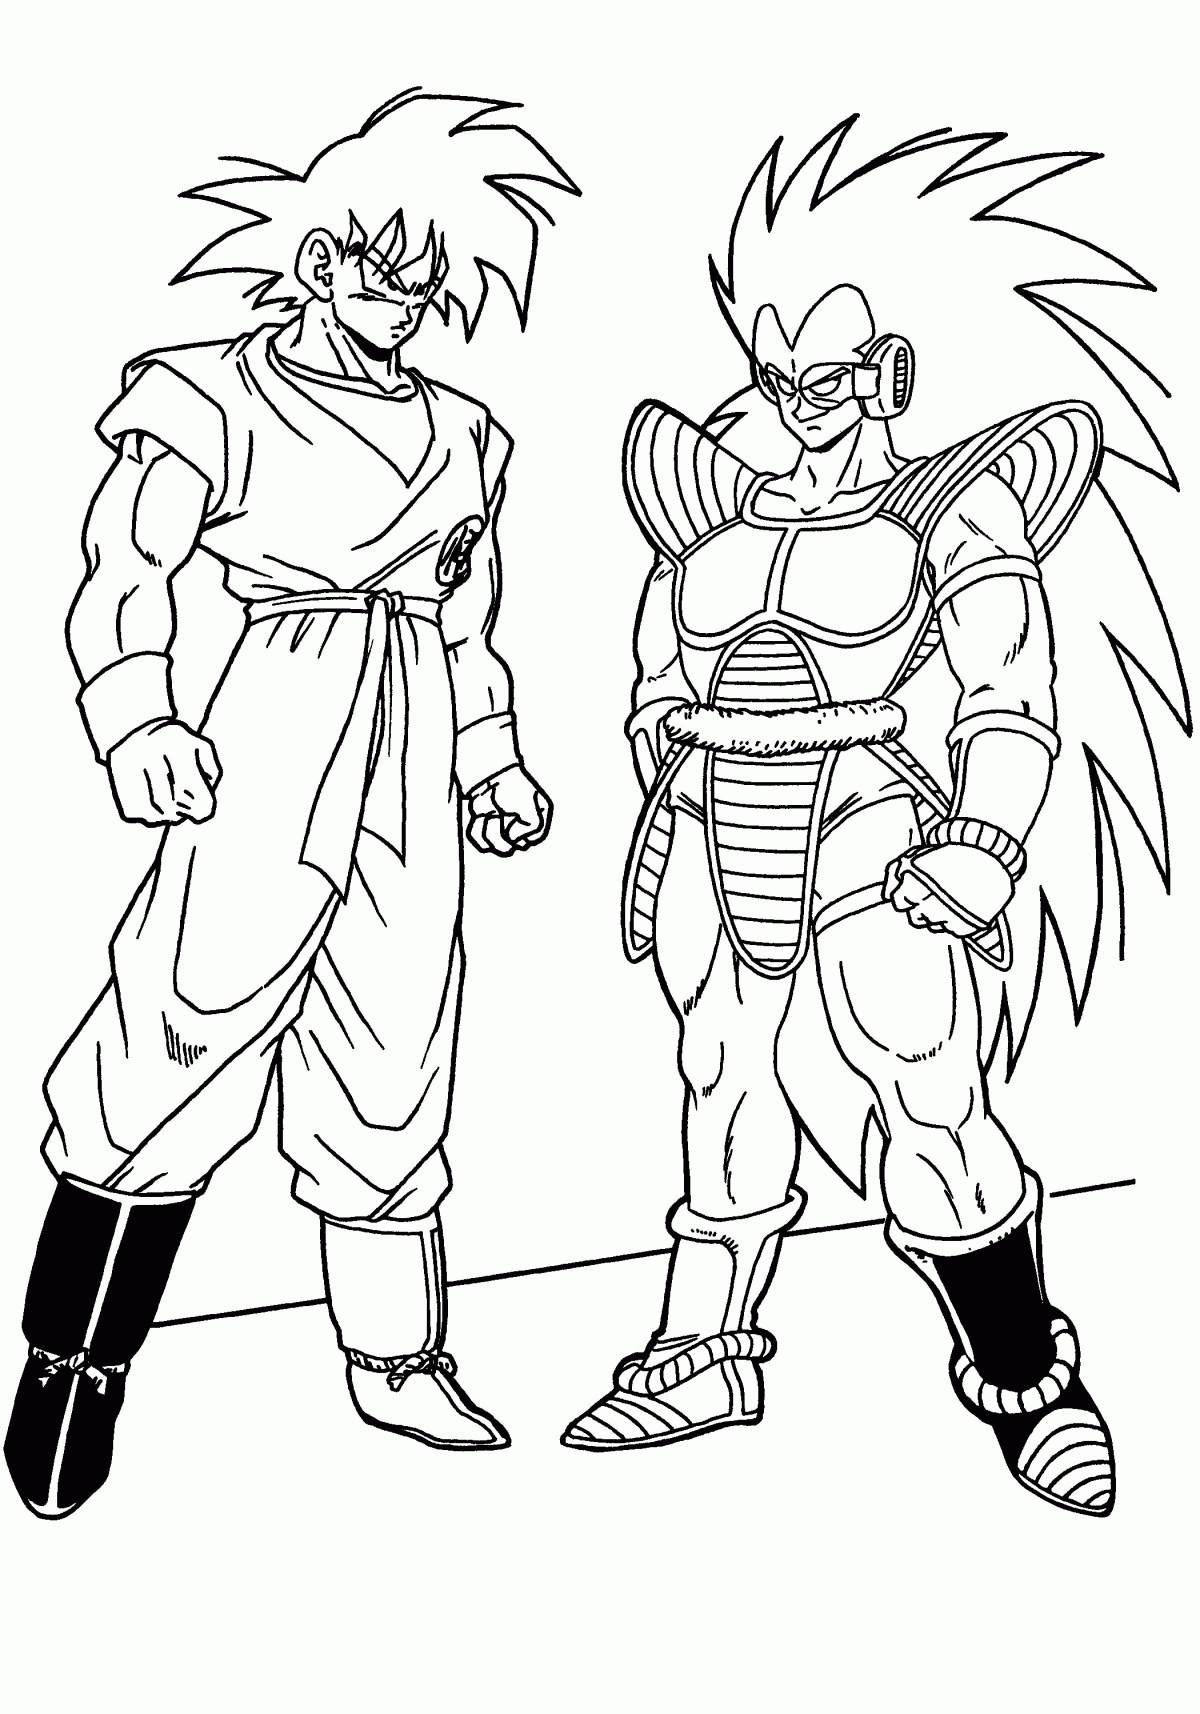 Dragon Ball Z Coloring Pages For Boys - Coloring Pages, books for Kids